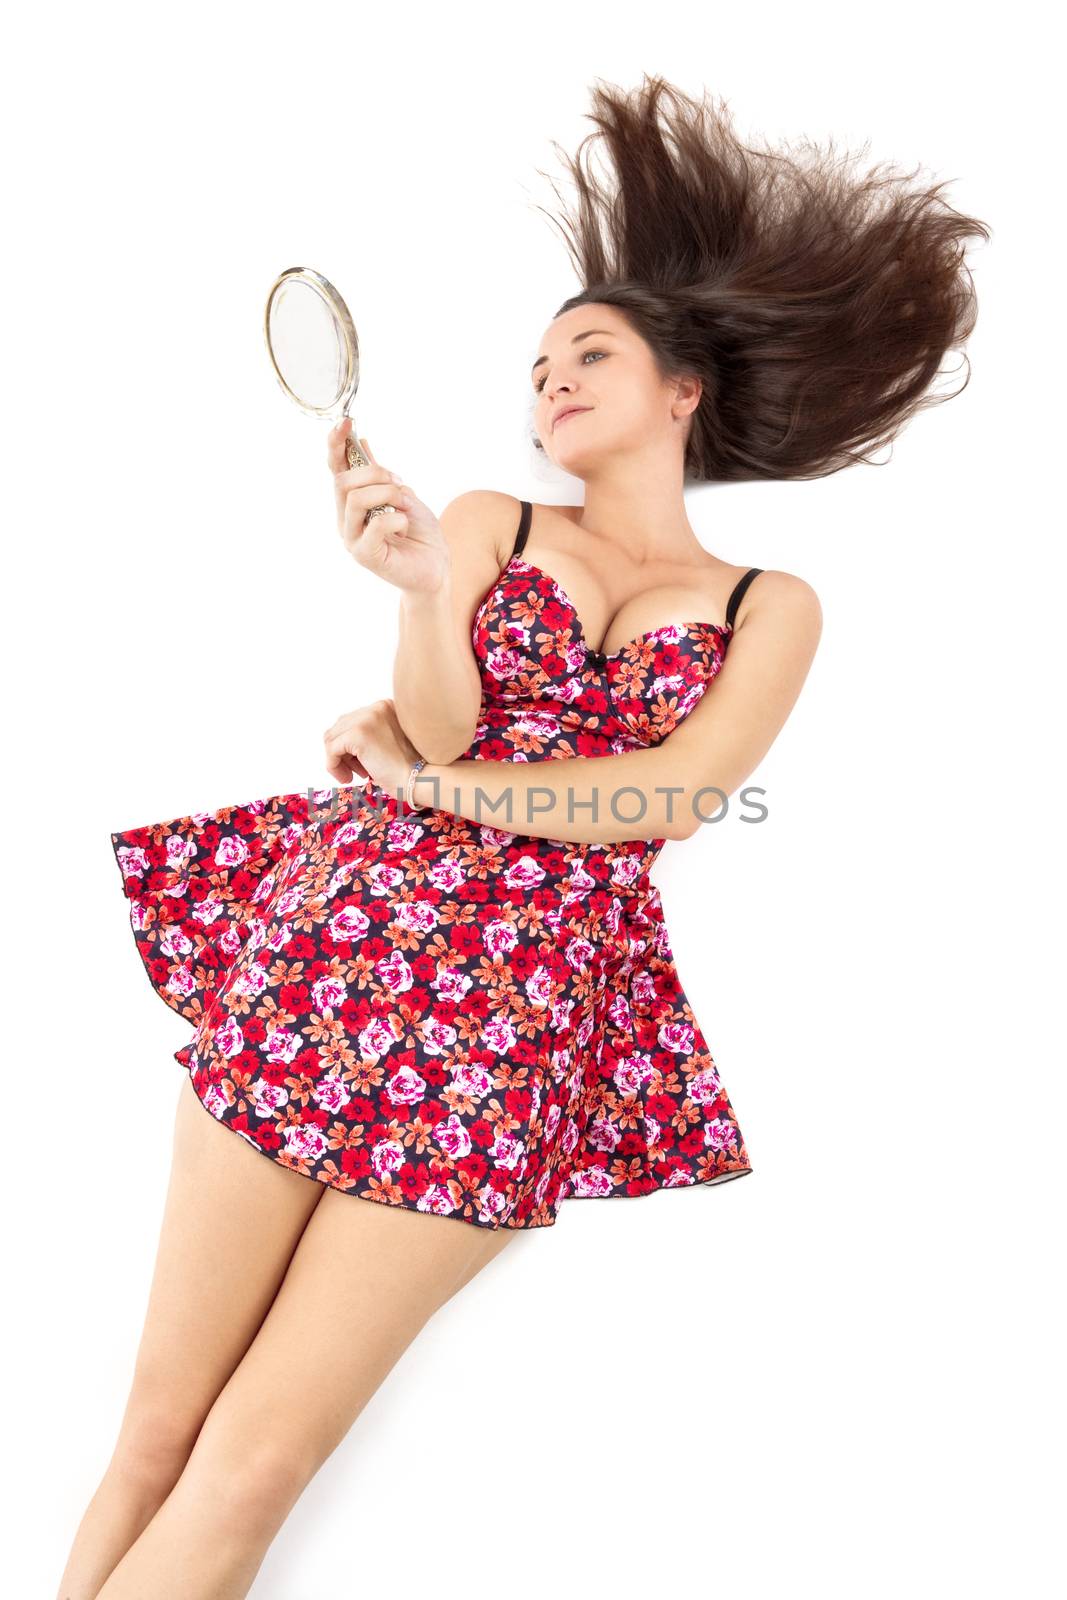 high angle view of a woman in summer dress with hand mirror - isolated on white